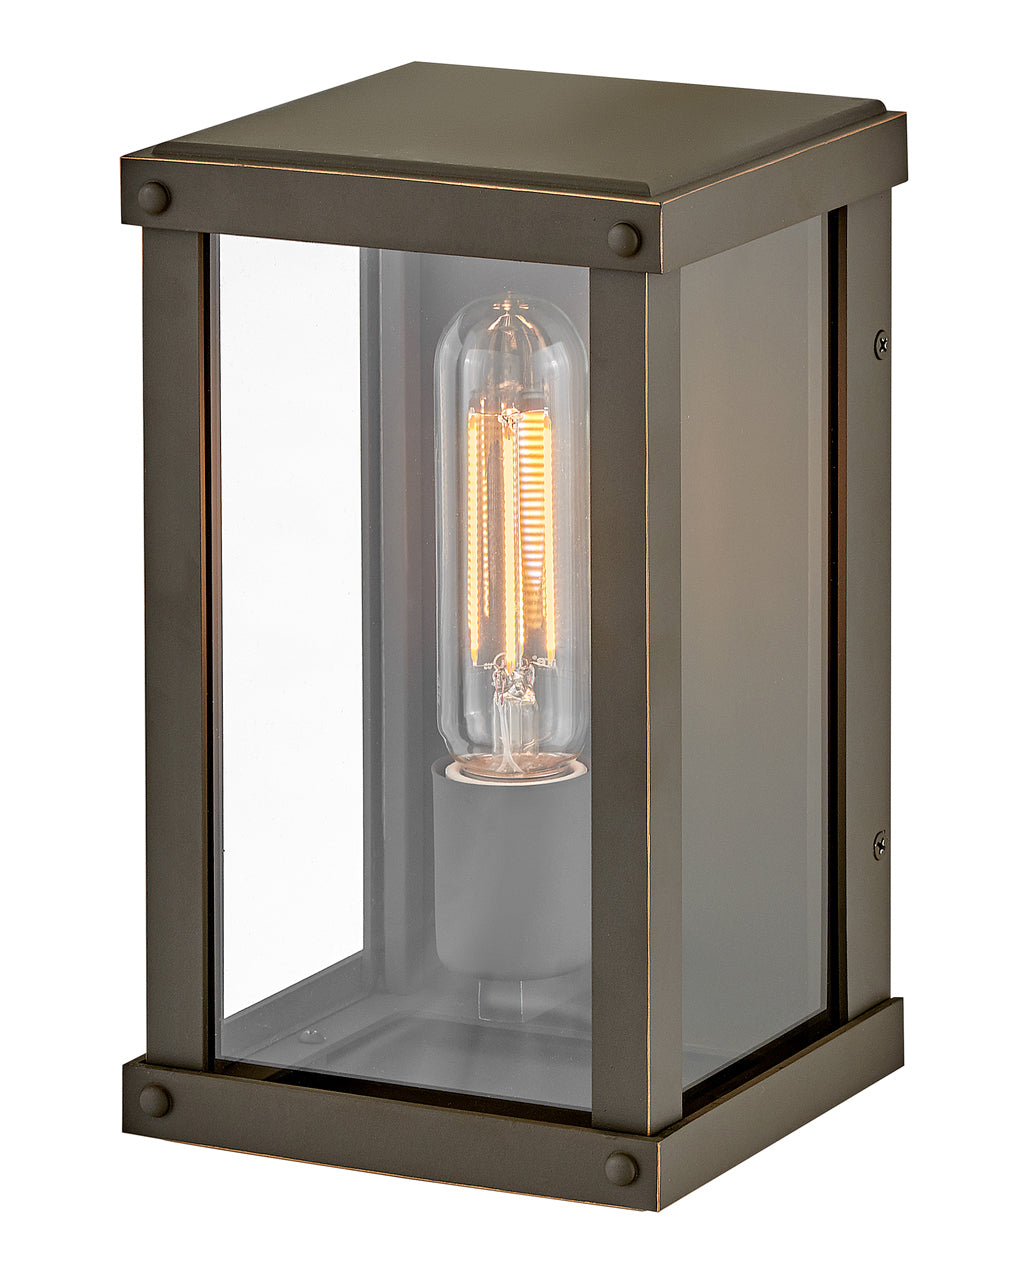 OUTDOOR BECKHAM Small Wall Mount Lantern Outdoor l Wall Hinkley Oil Rubbed Bronze 5.5x6.0x10.0 